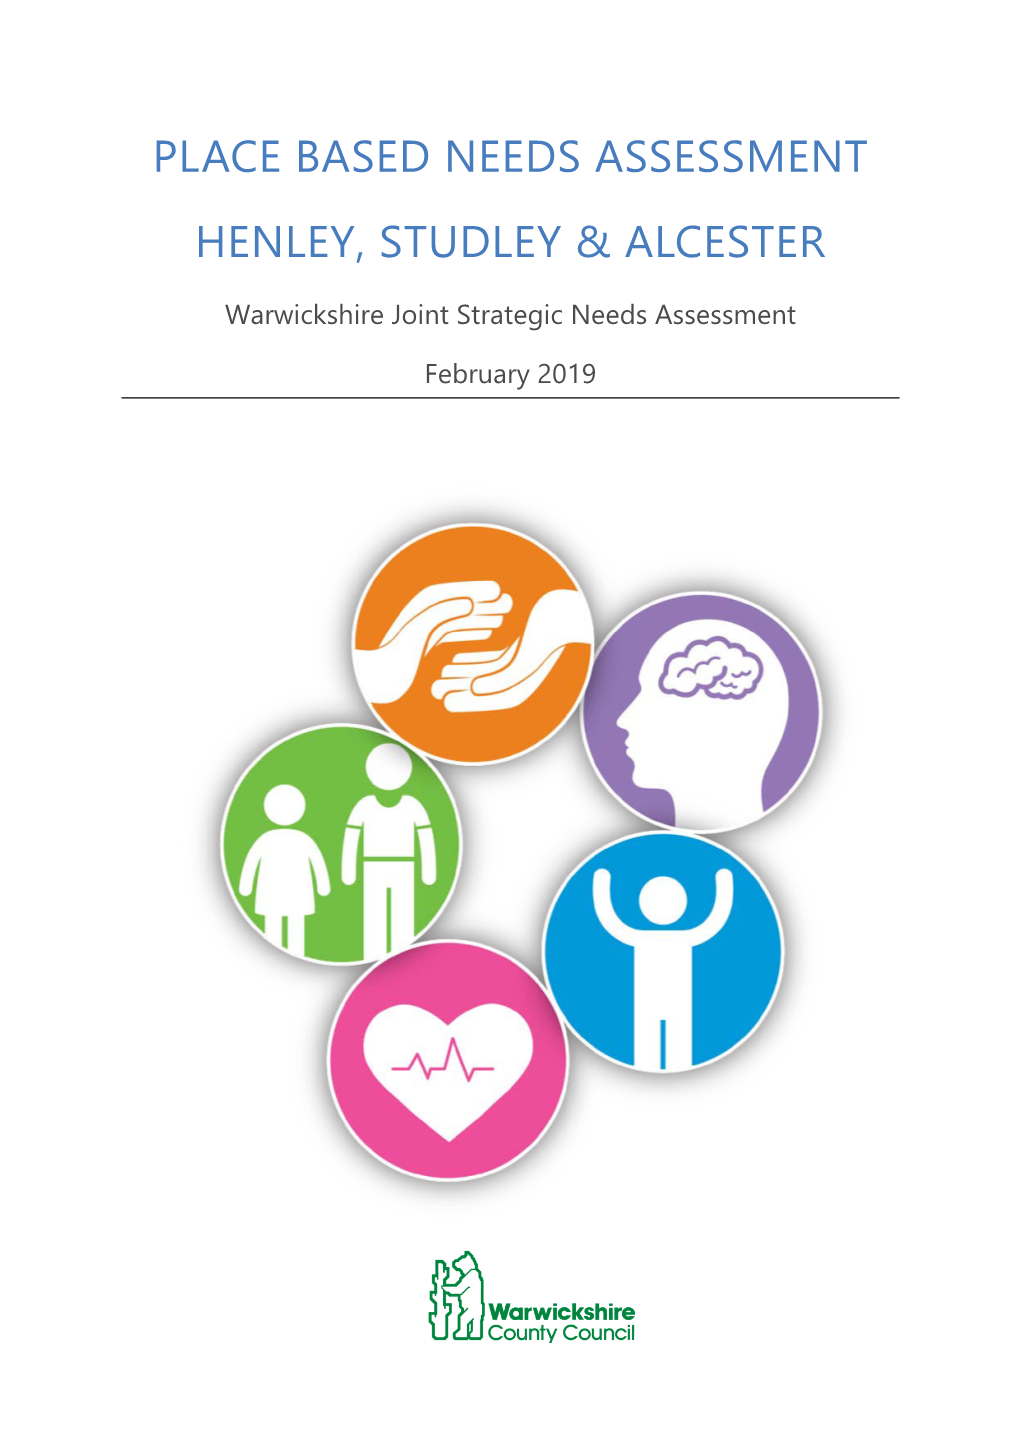 Place Based Needs Assessment Henley, Studley & Alcester